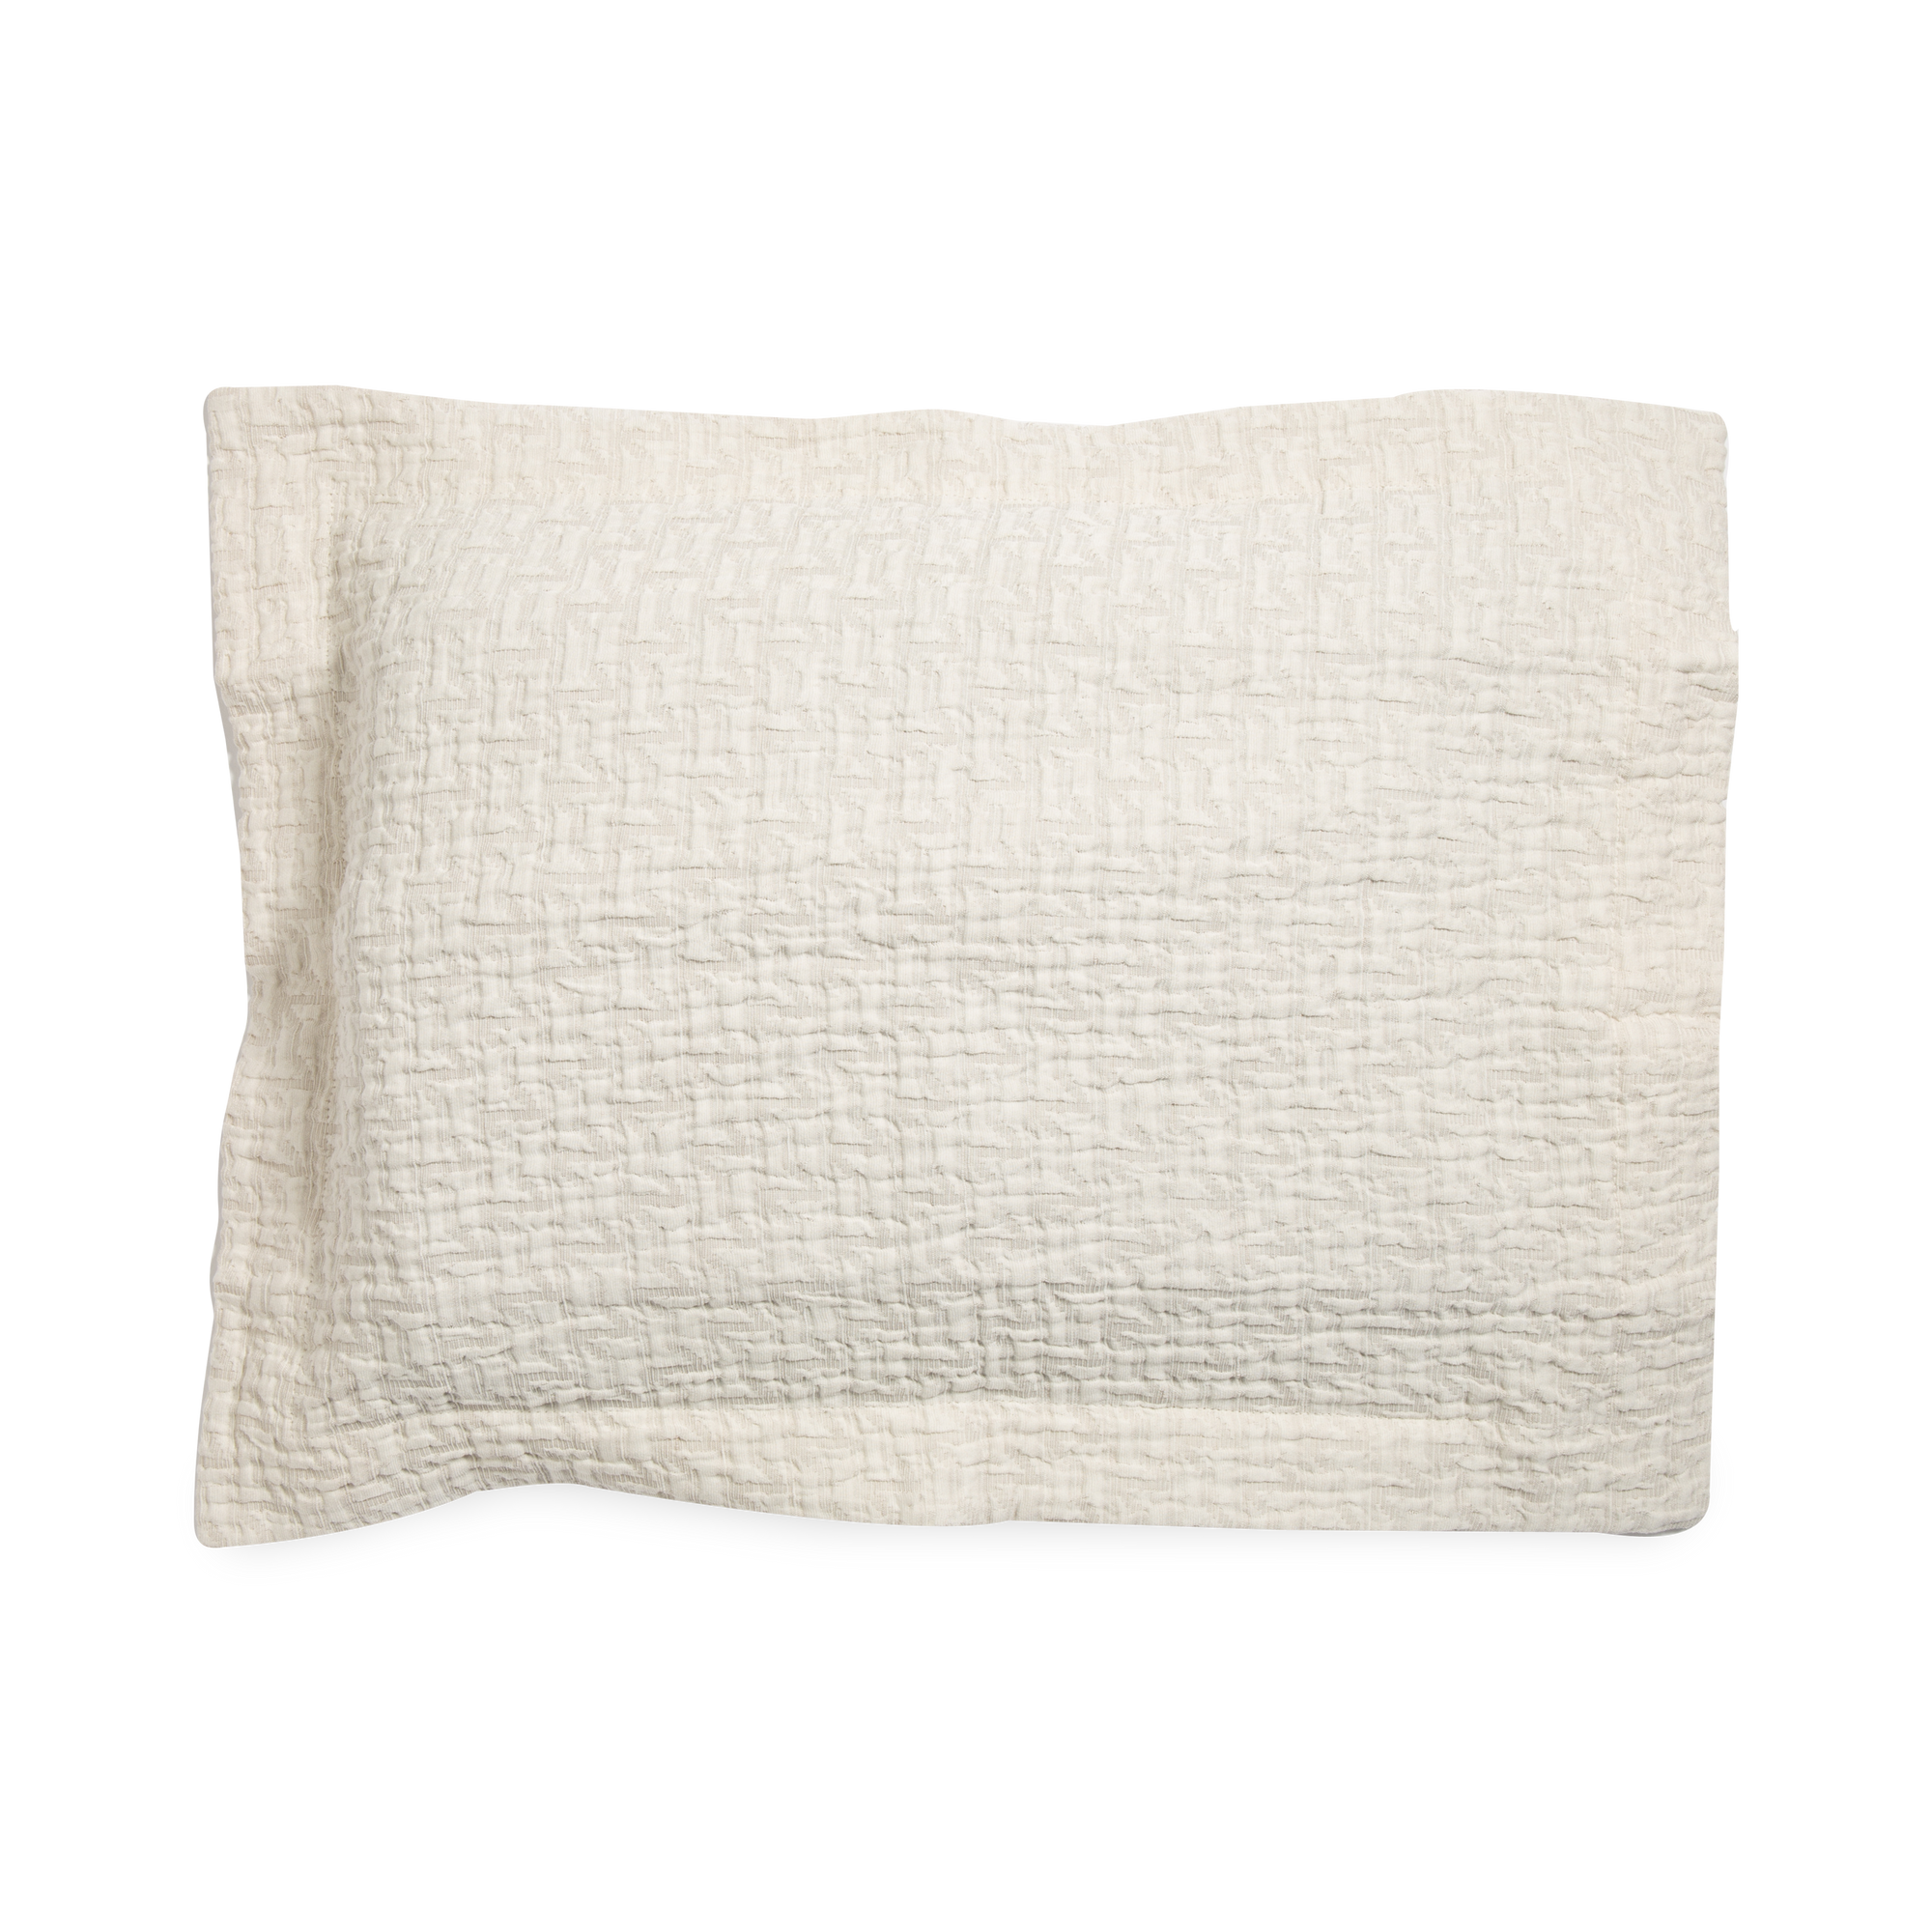 A deep, textured classic pillow  with an urban vibe that creates beauty, depth and offers lasting comfort.